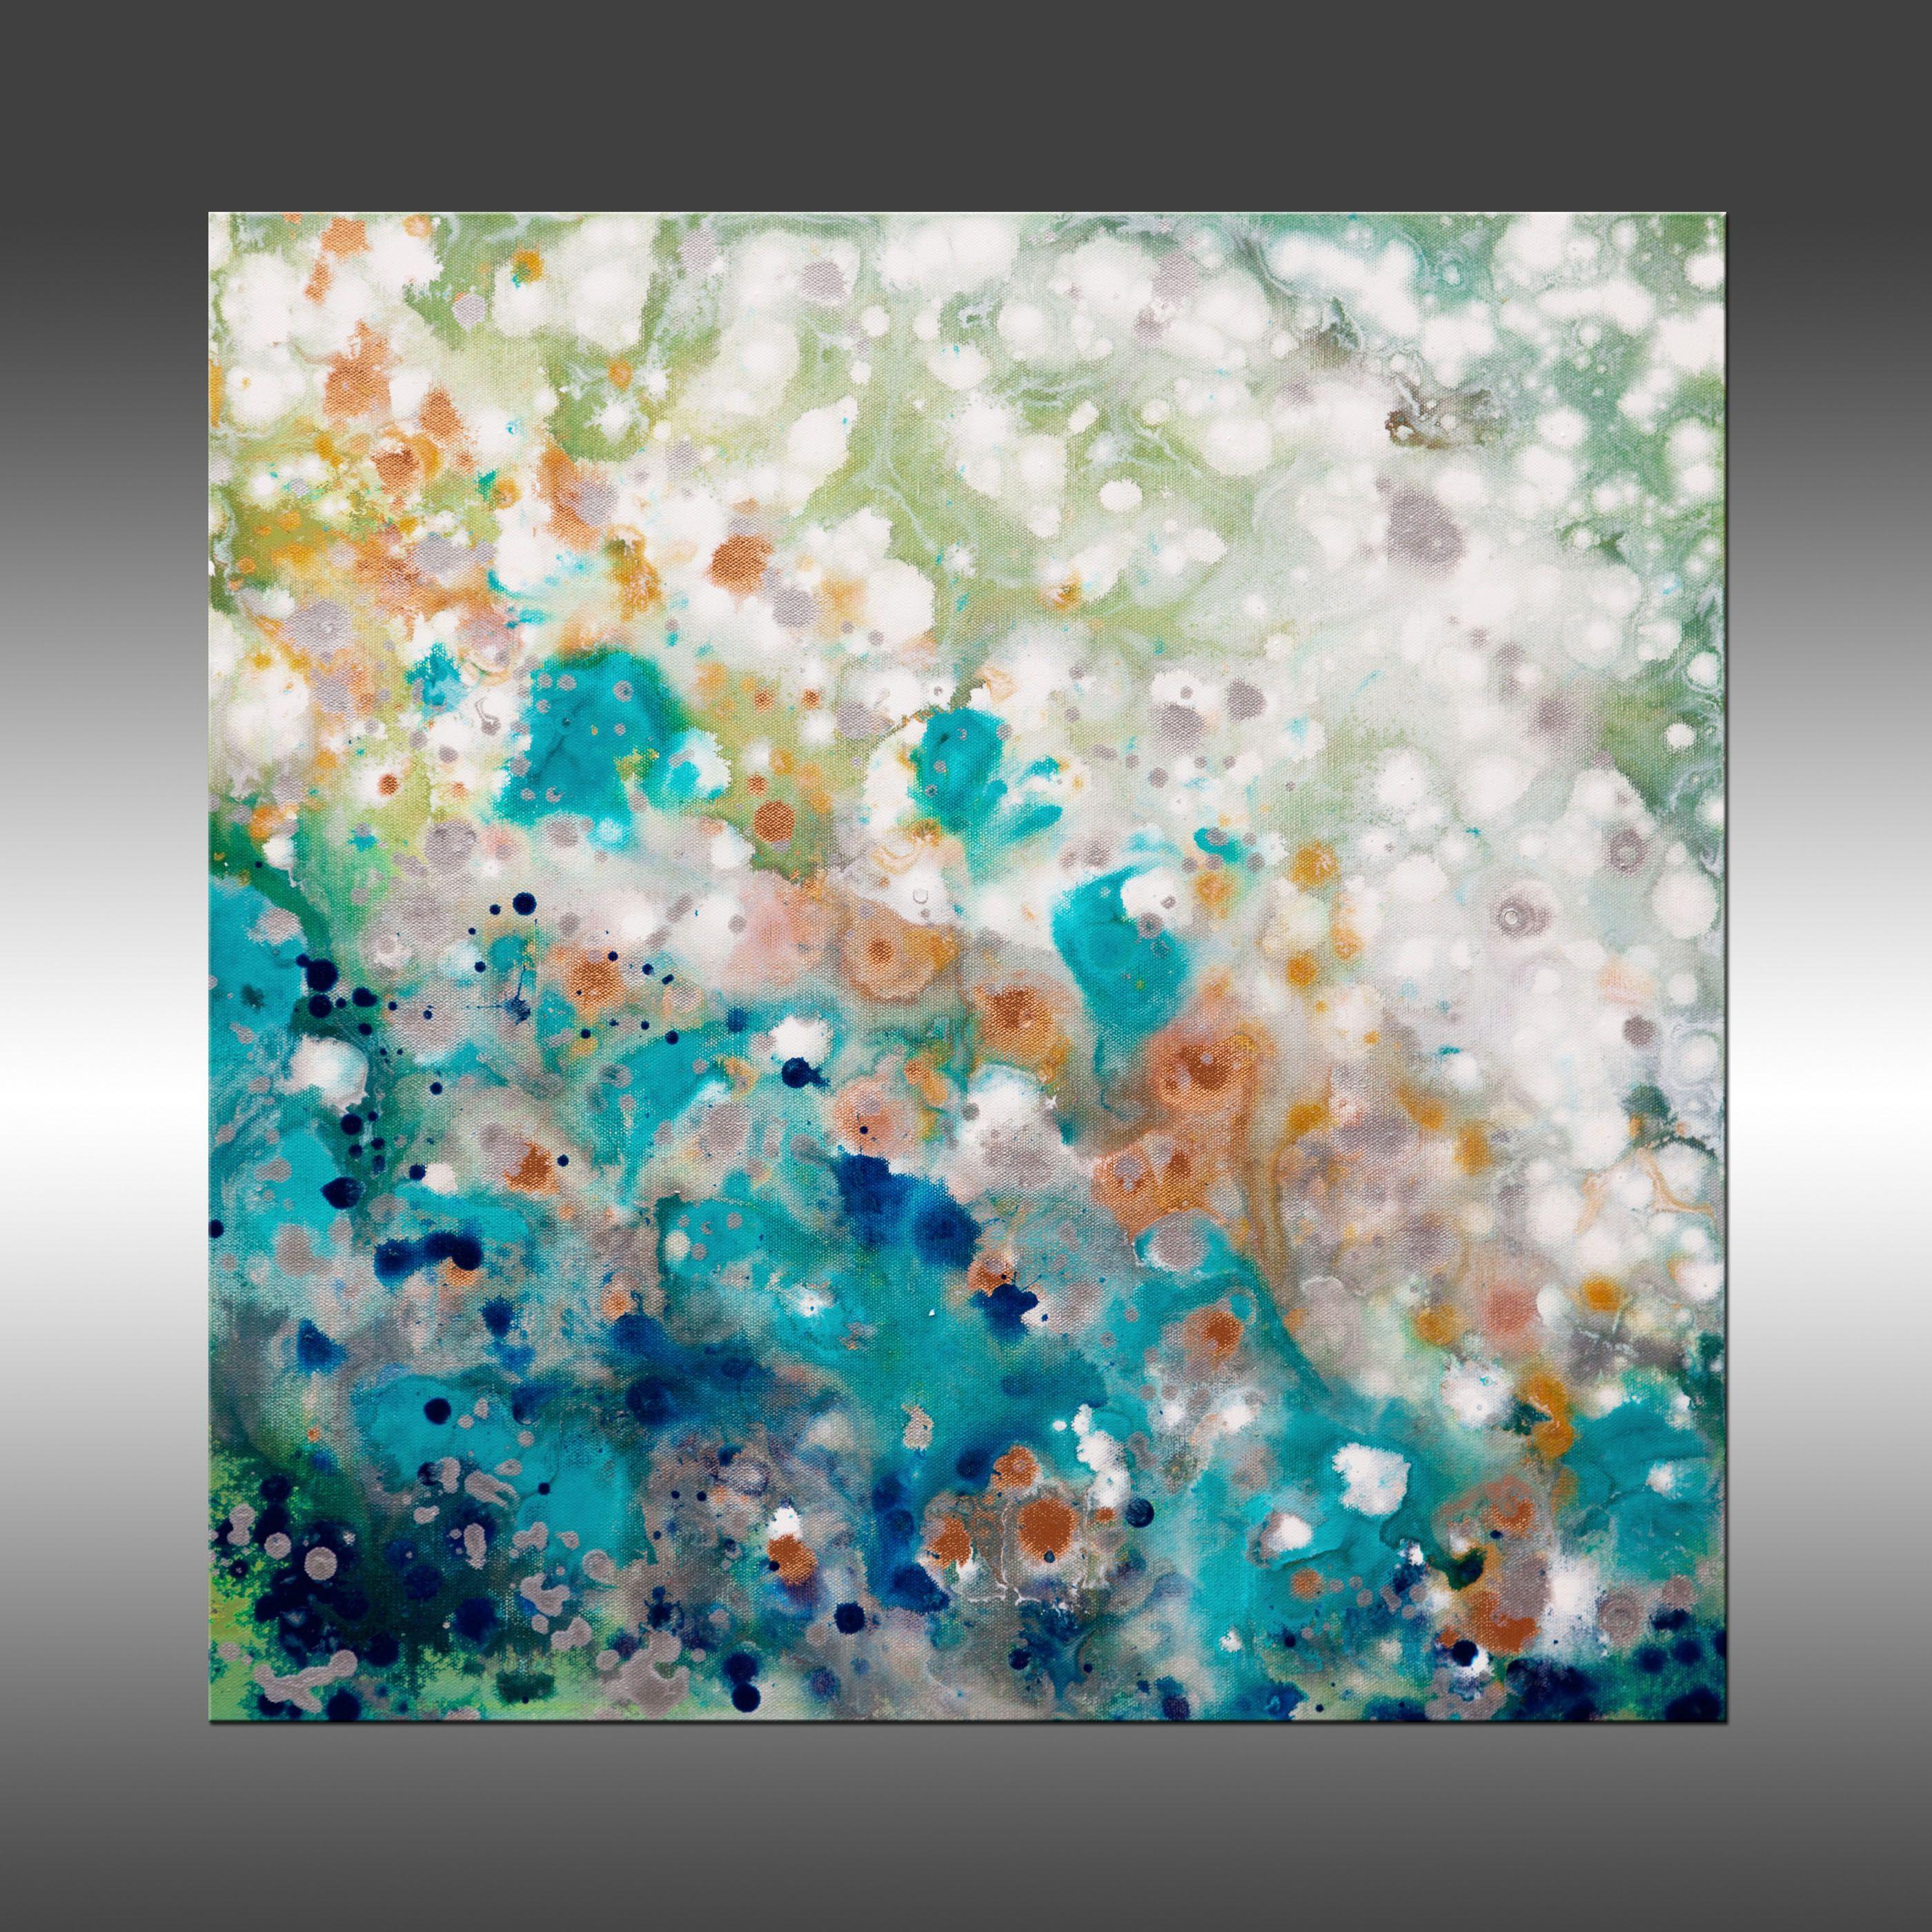 Liquid Energy 33 is an original painting, created with acrylic paint on gallery-wrapped canvas. It has a width of 24 inches and a height of 24 inches with a depth of 1.5 inches (24x24x1.5).    The colors used in the painting are white, blue, green,